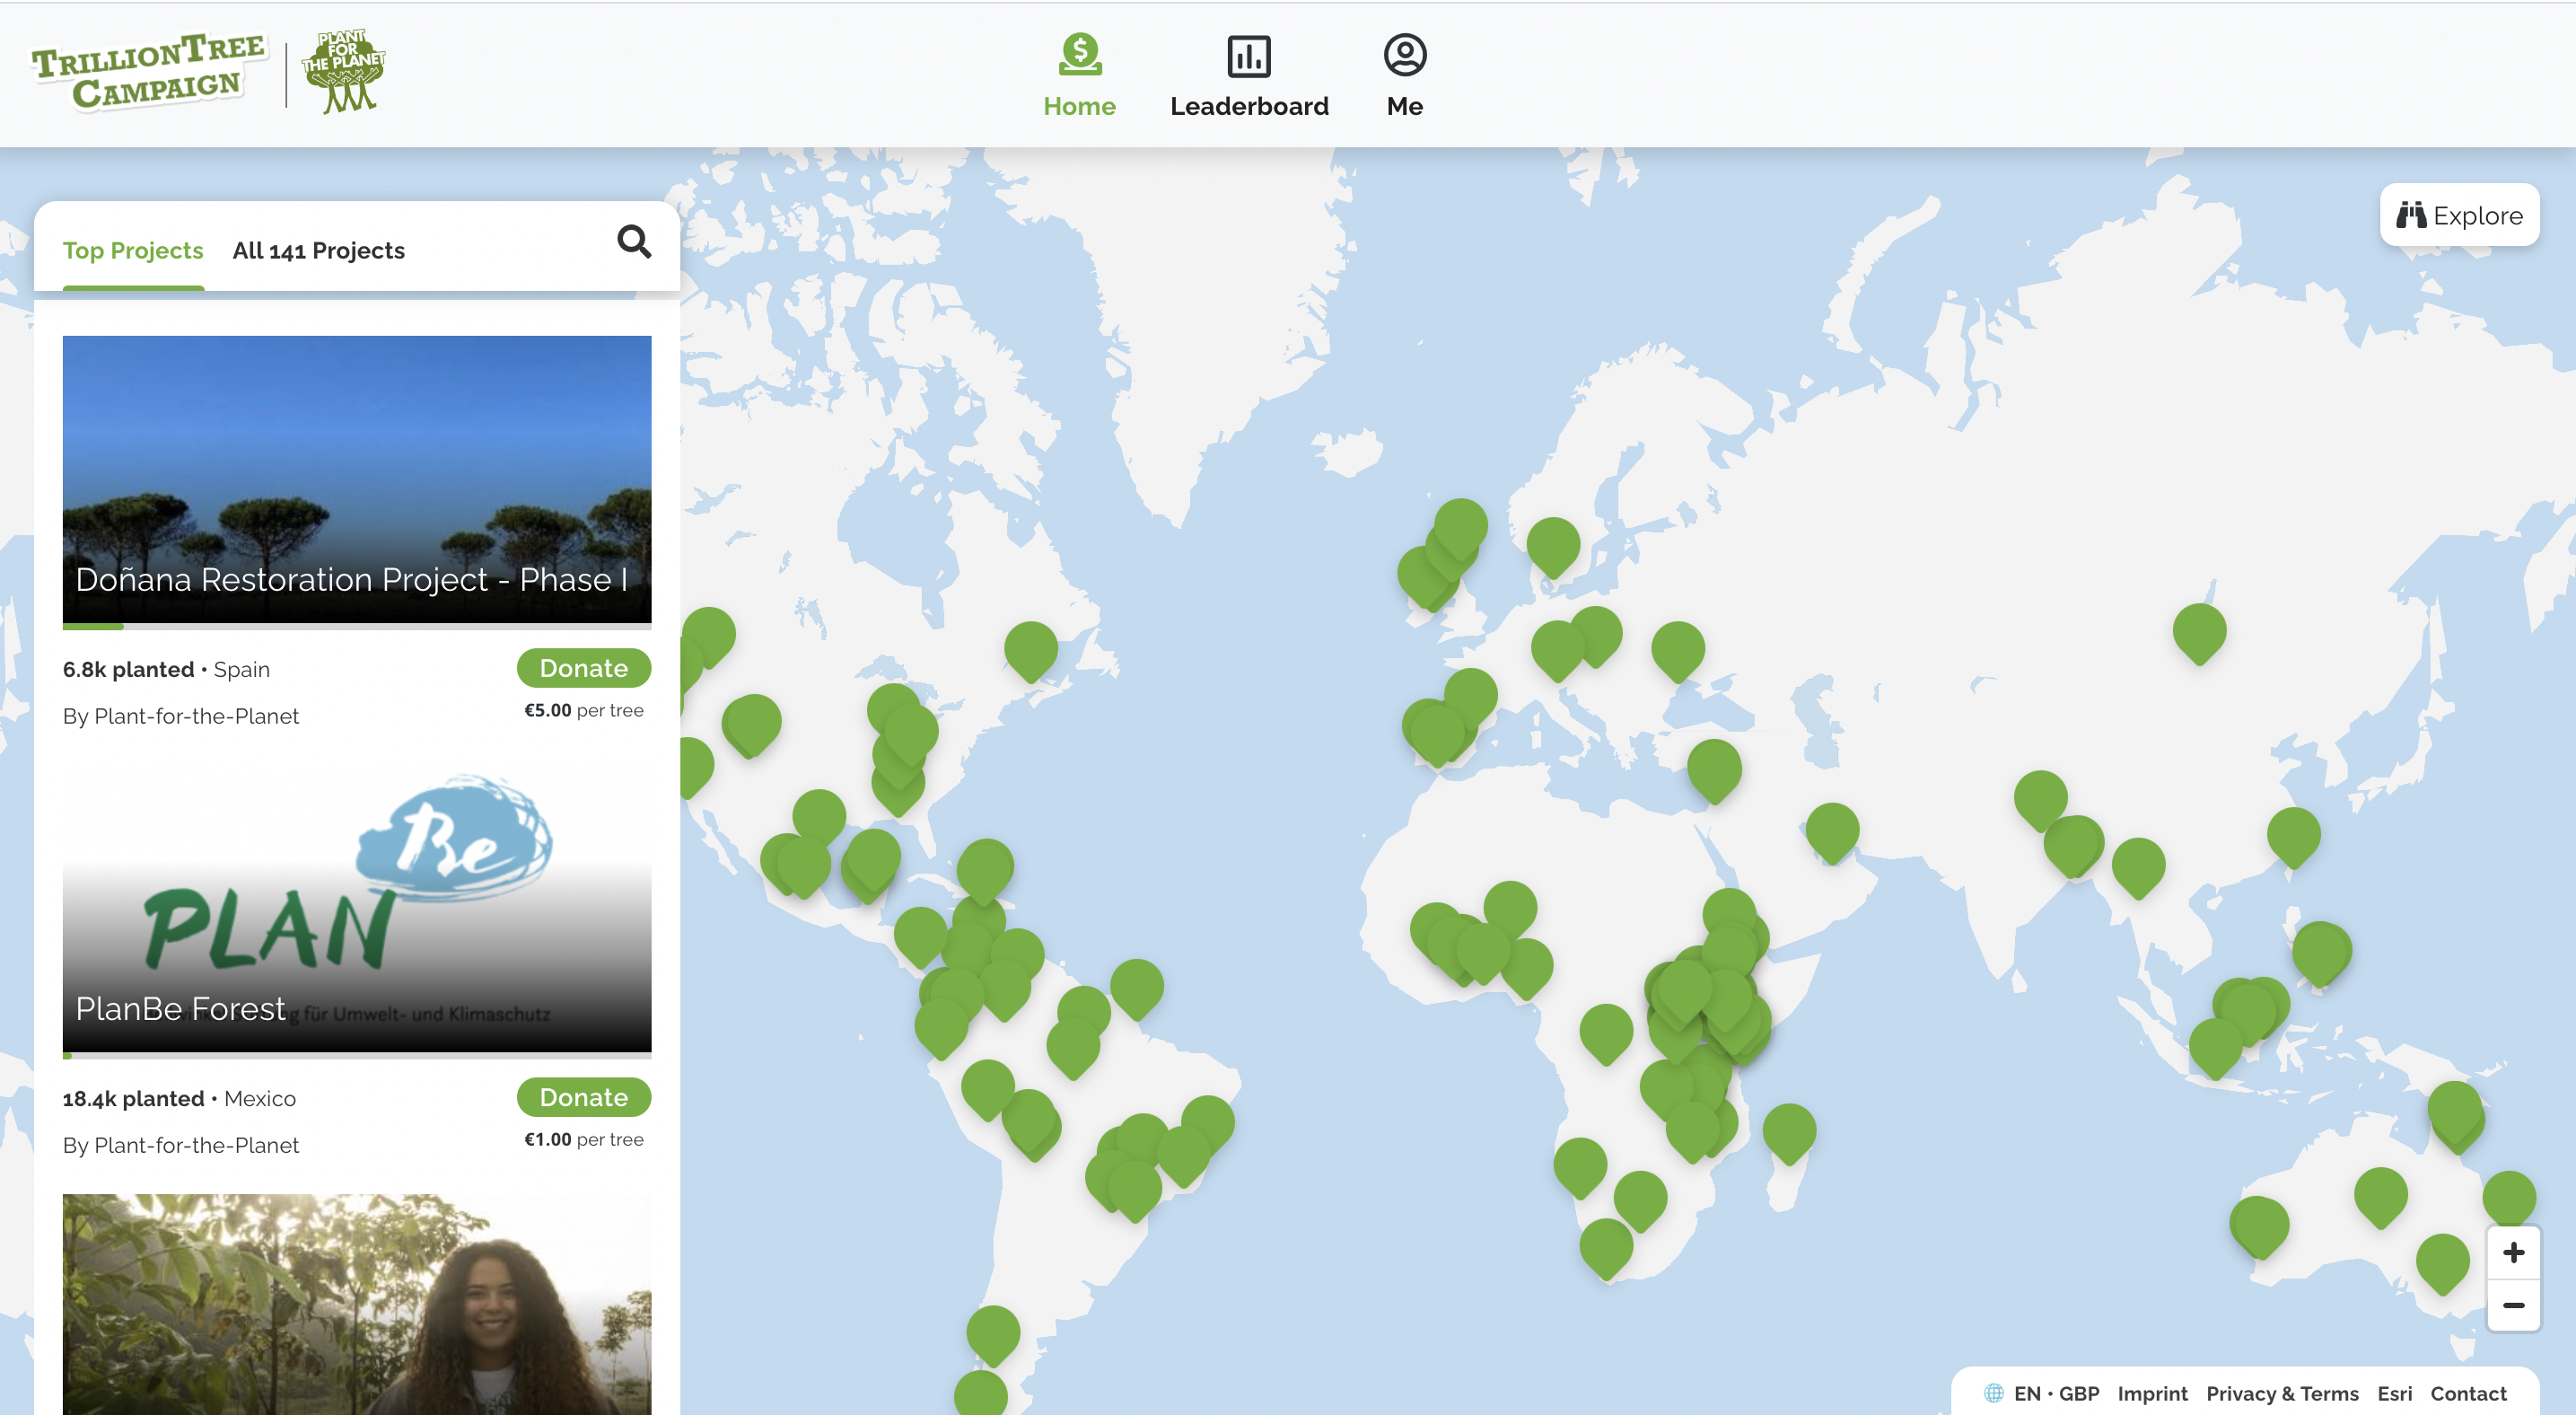 TrillionTreeCampaign.org homepage screenshot showing global map with green dots for all of their listed tree-planting projects